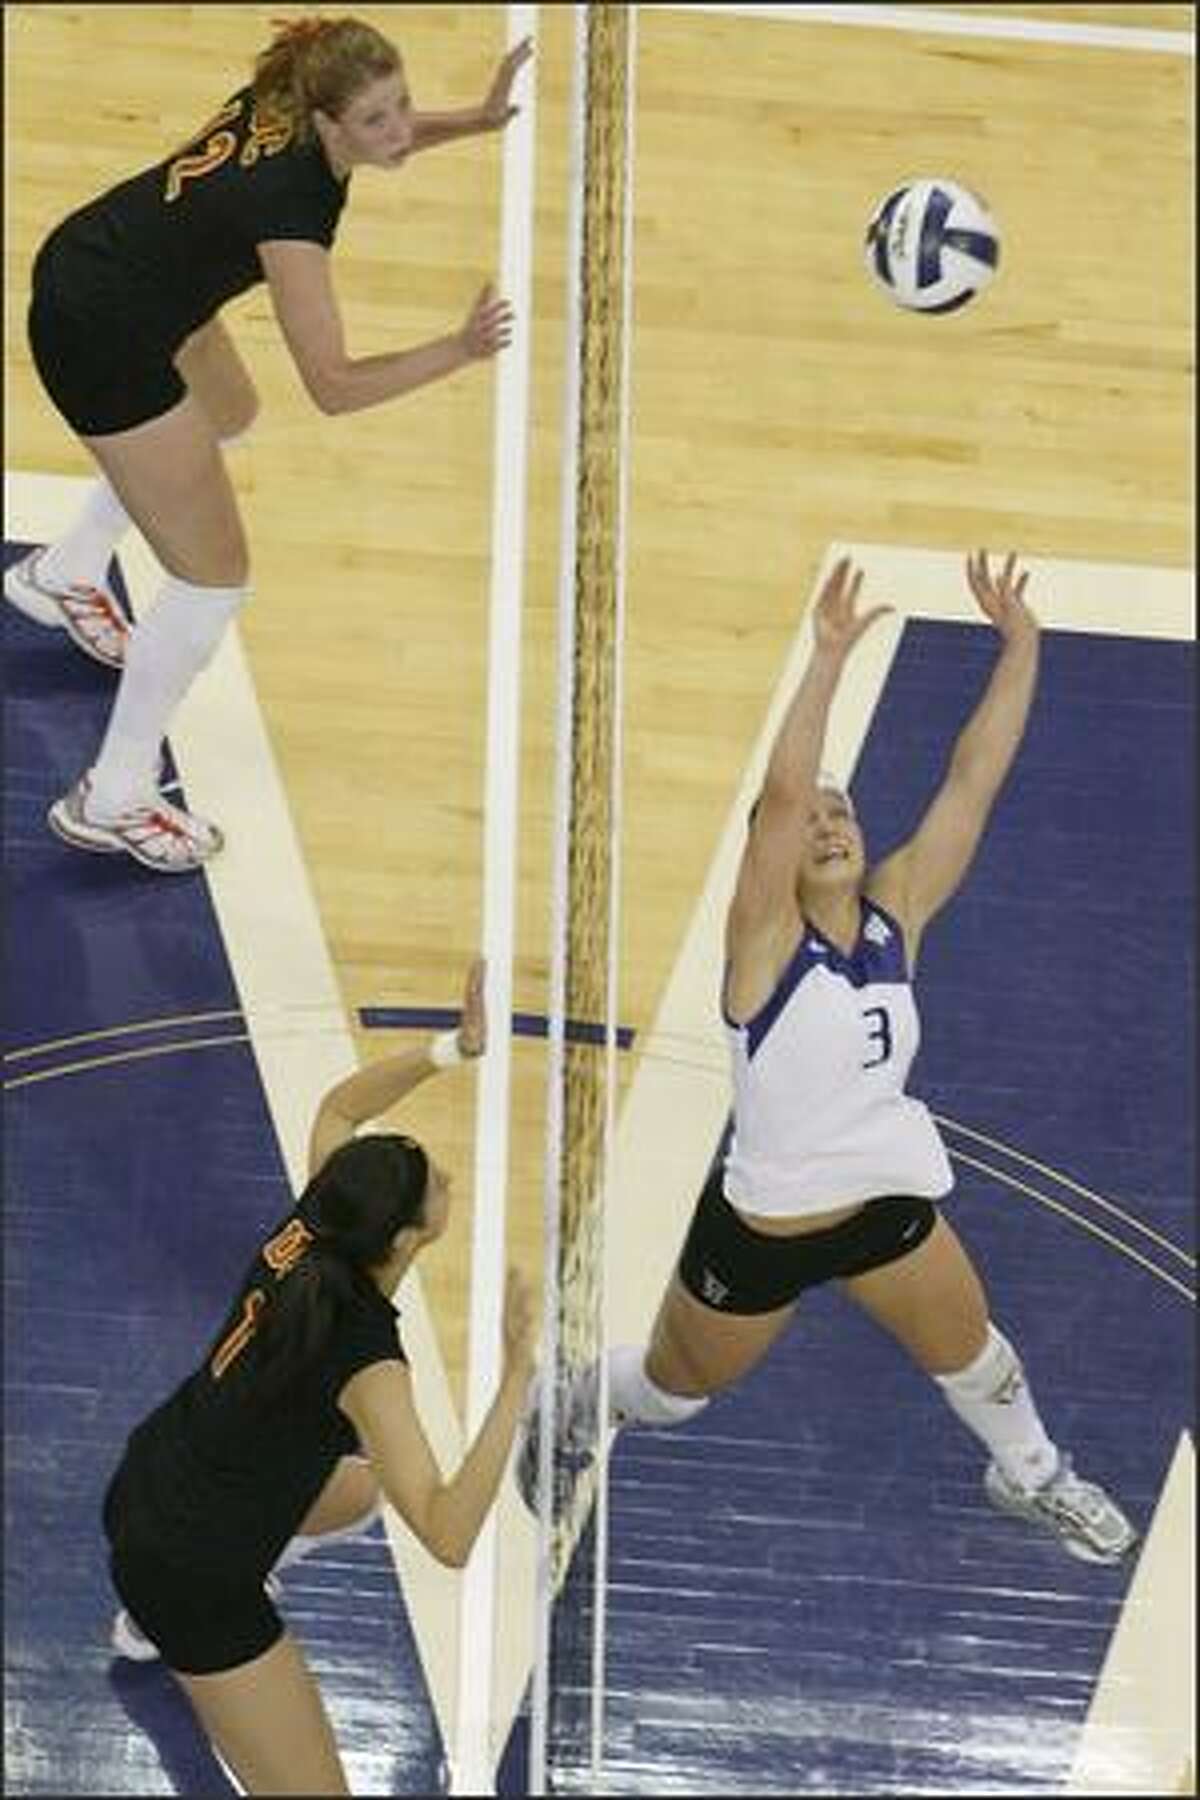 Courtney Thompson sets the ball for a kill during UW's win against USC in Seattle. Thompson earned first-team All-American honors last year after ranking third nationally with 14.67 assists per game.